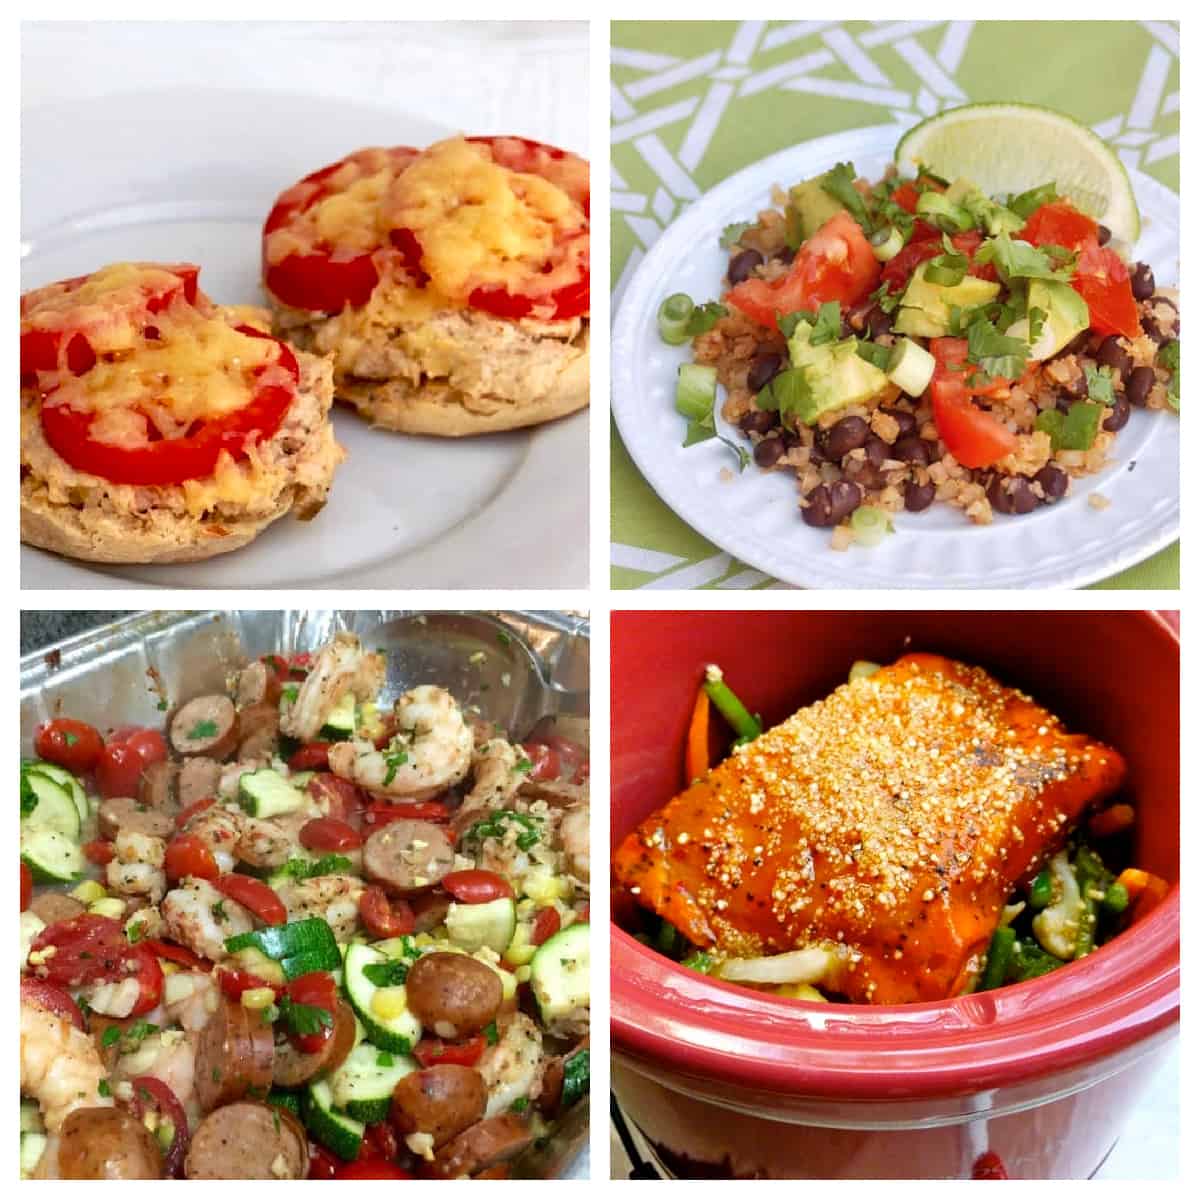 Photo Collage of WW Recipes: English Muffin Tuna Melt, Cauliflower Rice & Beans, Shrimp Boil in Foil, CrockPot Salmon & Vegetables in the Slow Cooker